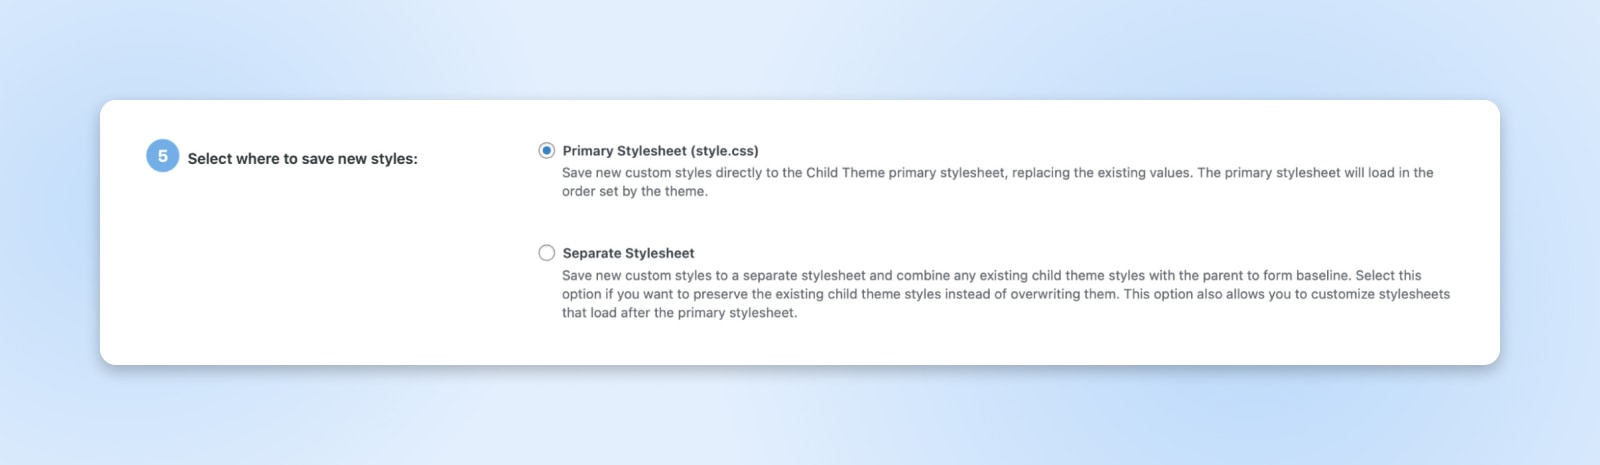 step 5: select where to save new styles with "primary stylesheet" selected instead of "separate stylesheet" 